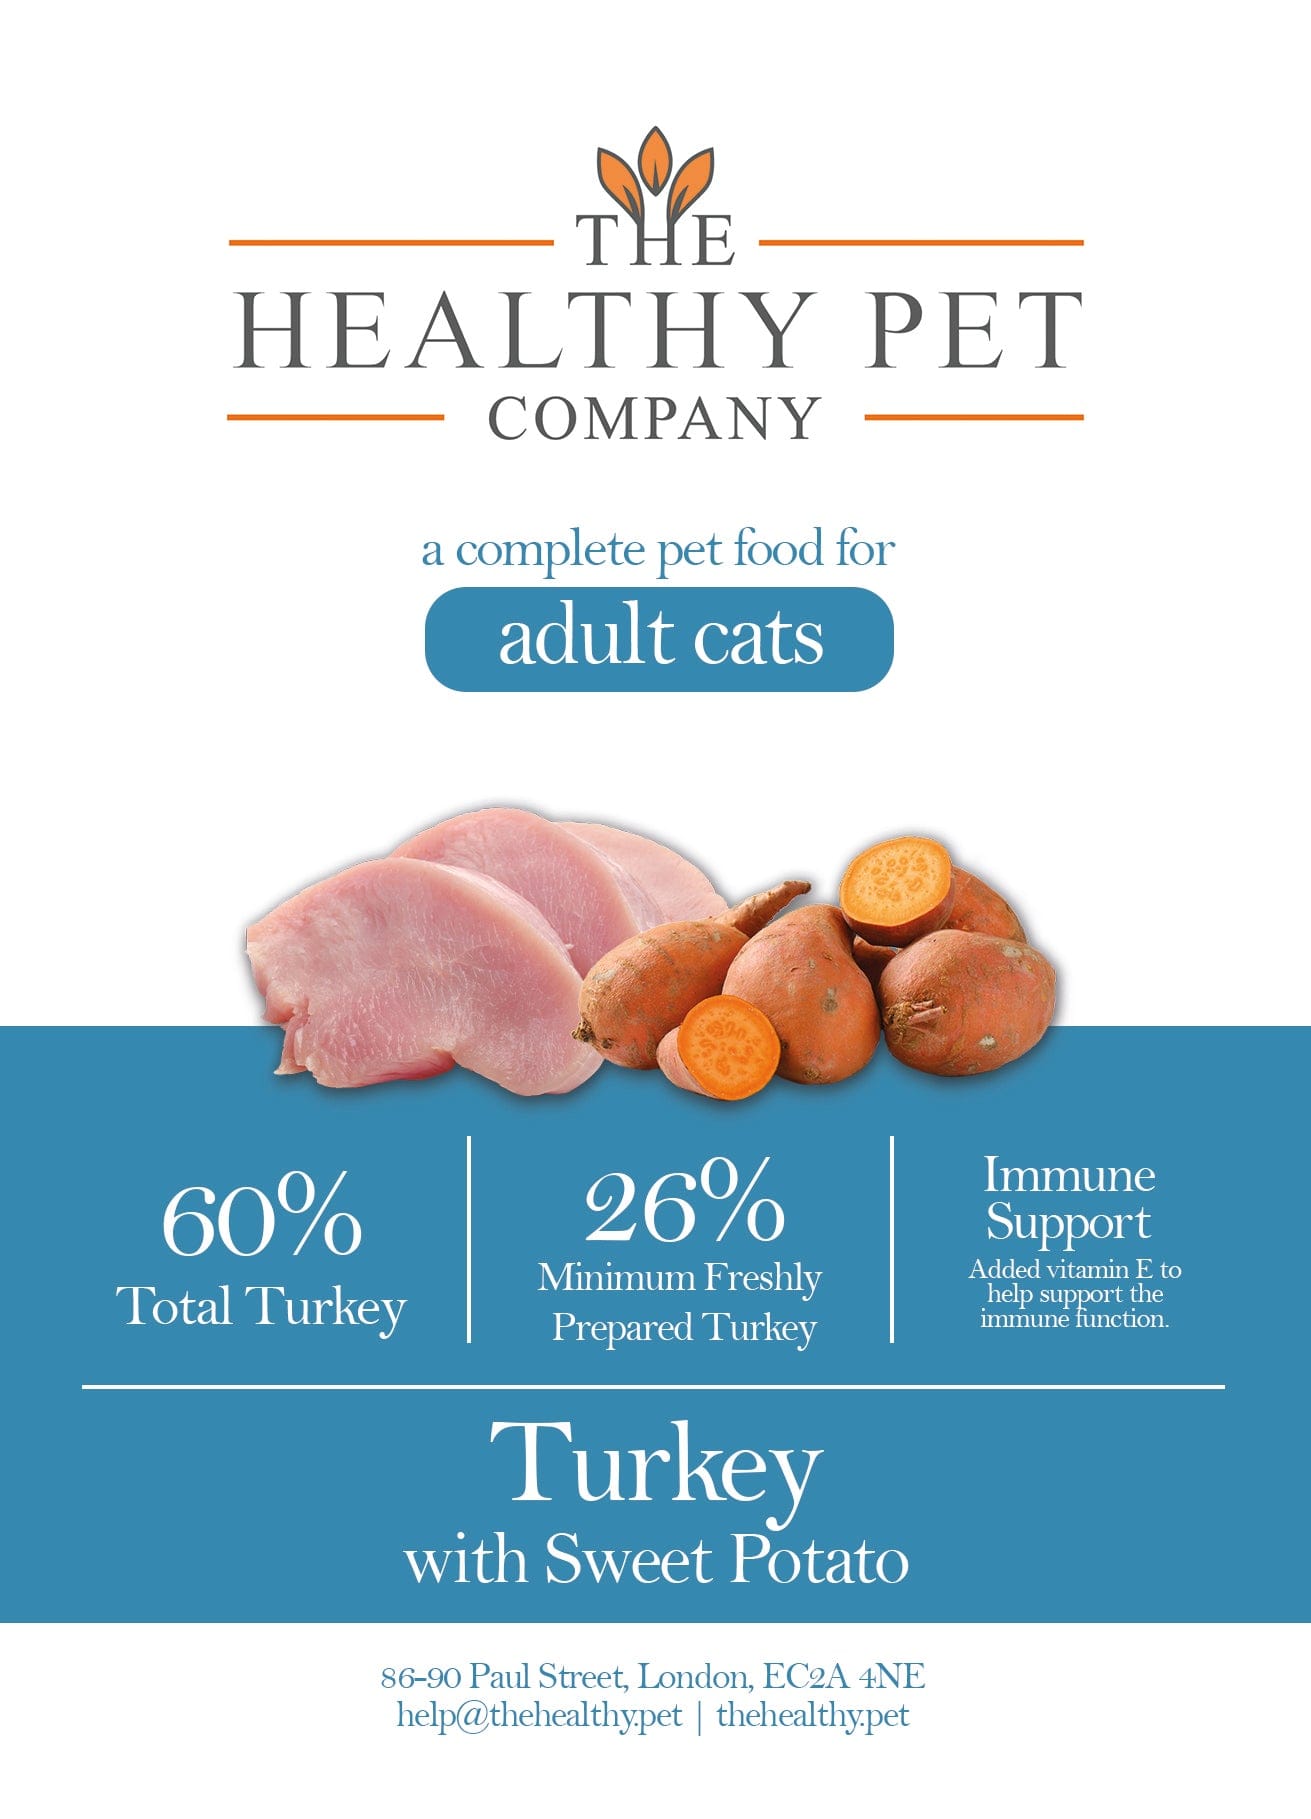 The Healthy Pet Company Complete Meal - Turkey & Sweet Potato for Adult Cats - The Healthy Pet Company